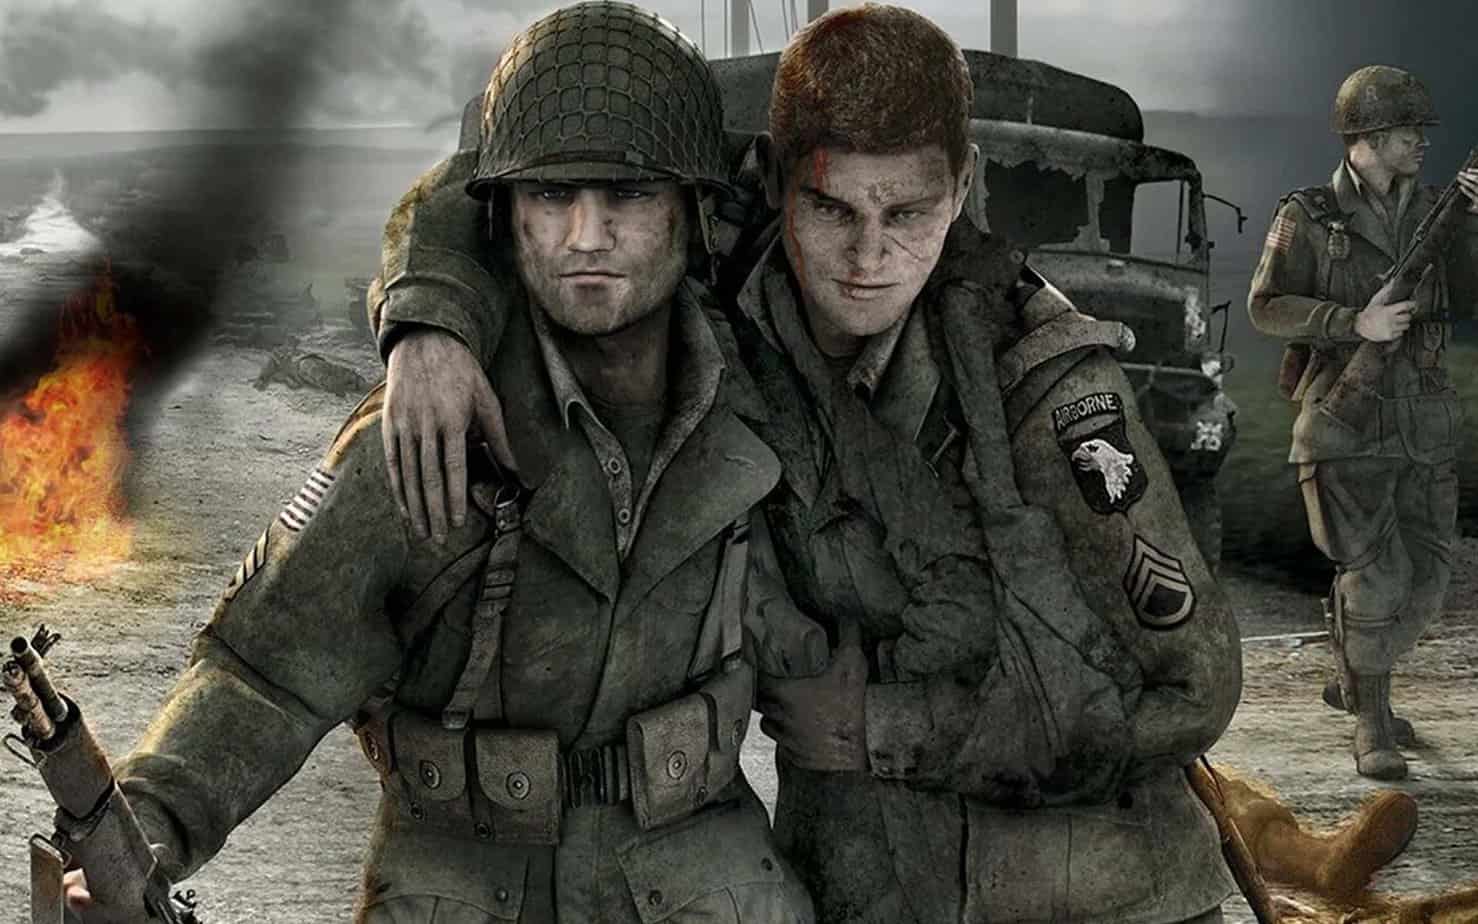 Brothers in Arms is Making a comeback - As a TV show no less